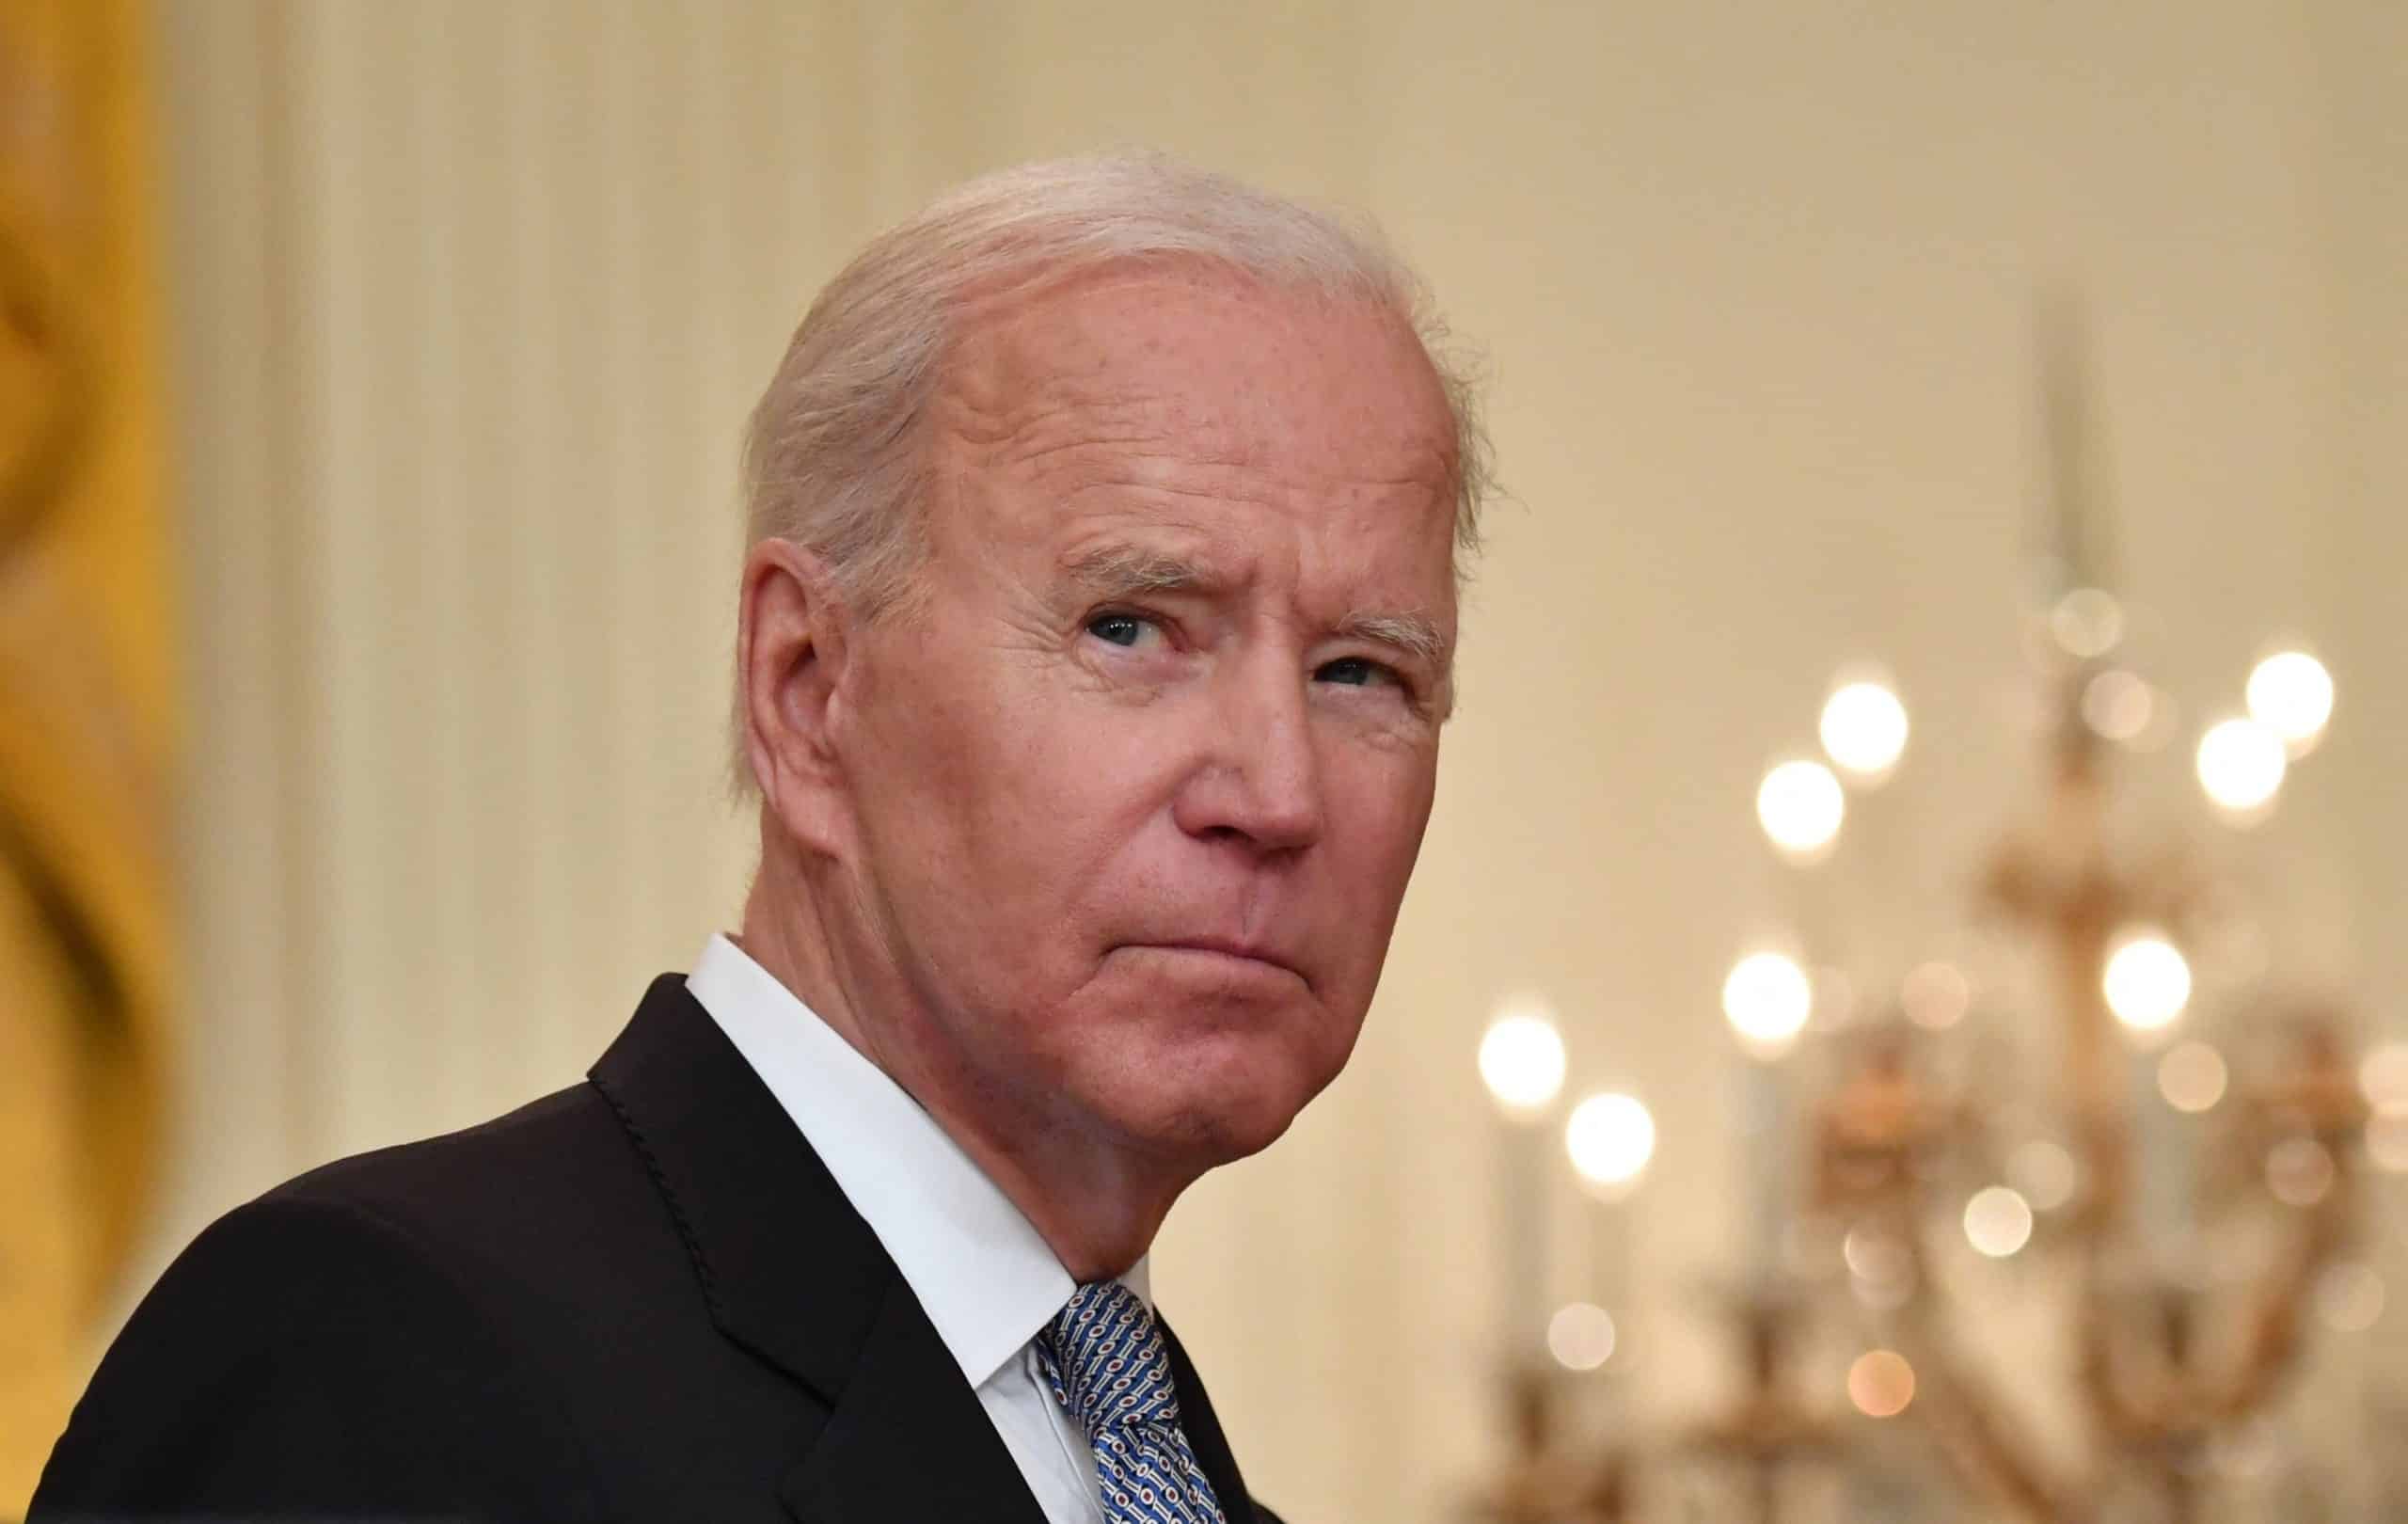 Biden: U.S. To ‘Pursue Every Possible Avenue’ To Bring Griner Home